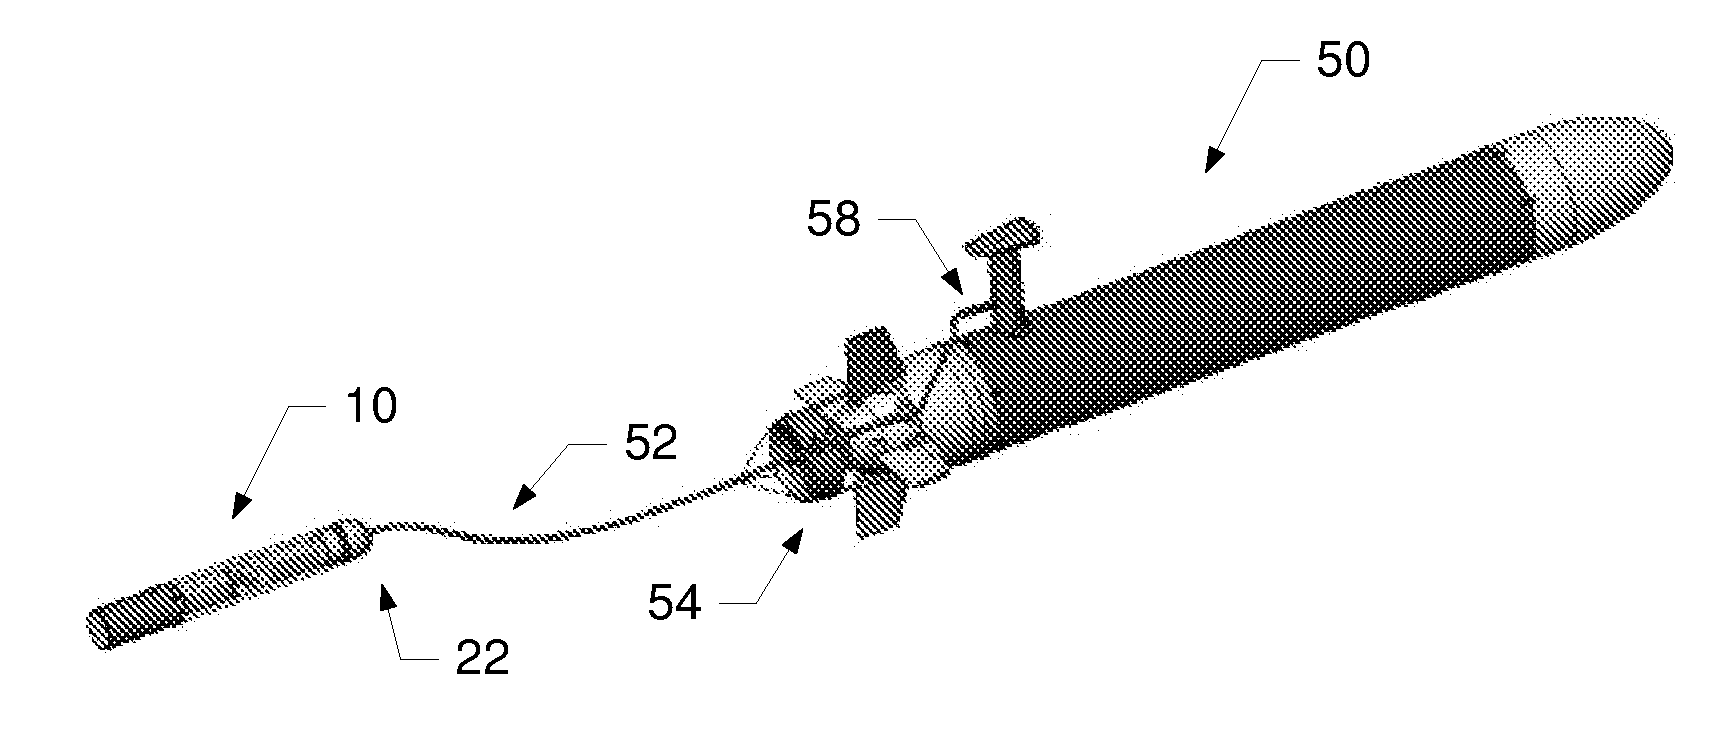 External rescue and recovery devices and methods for underwater vehicles